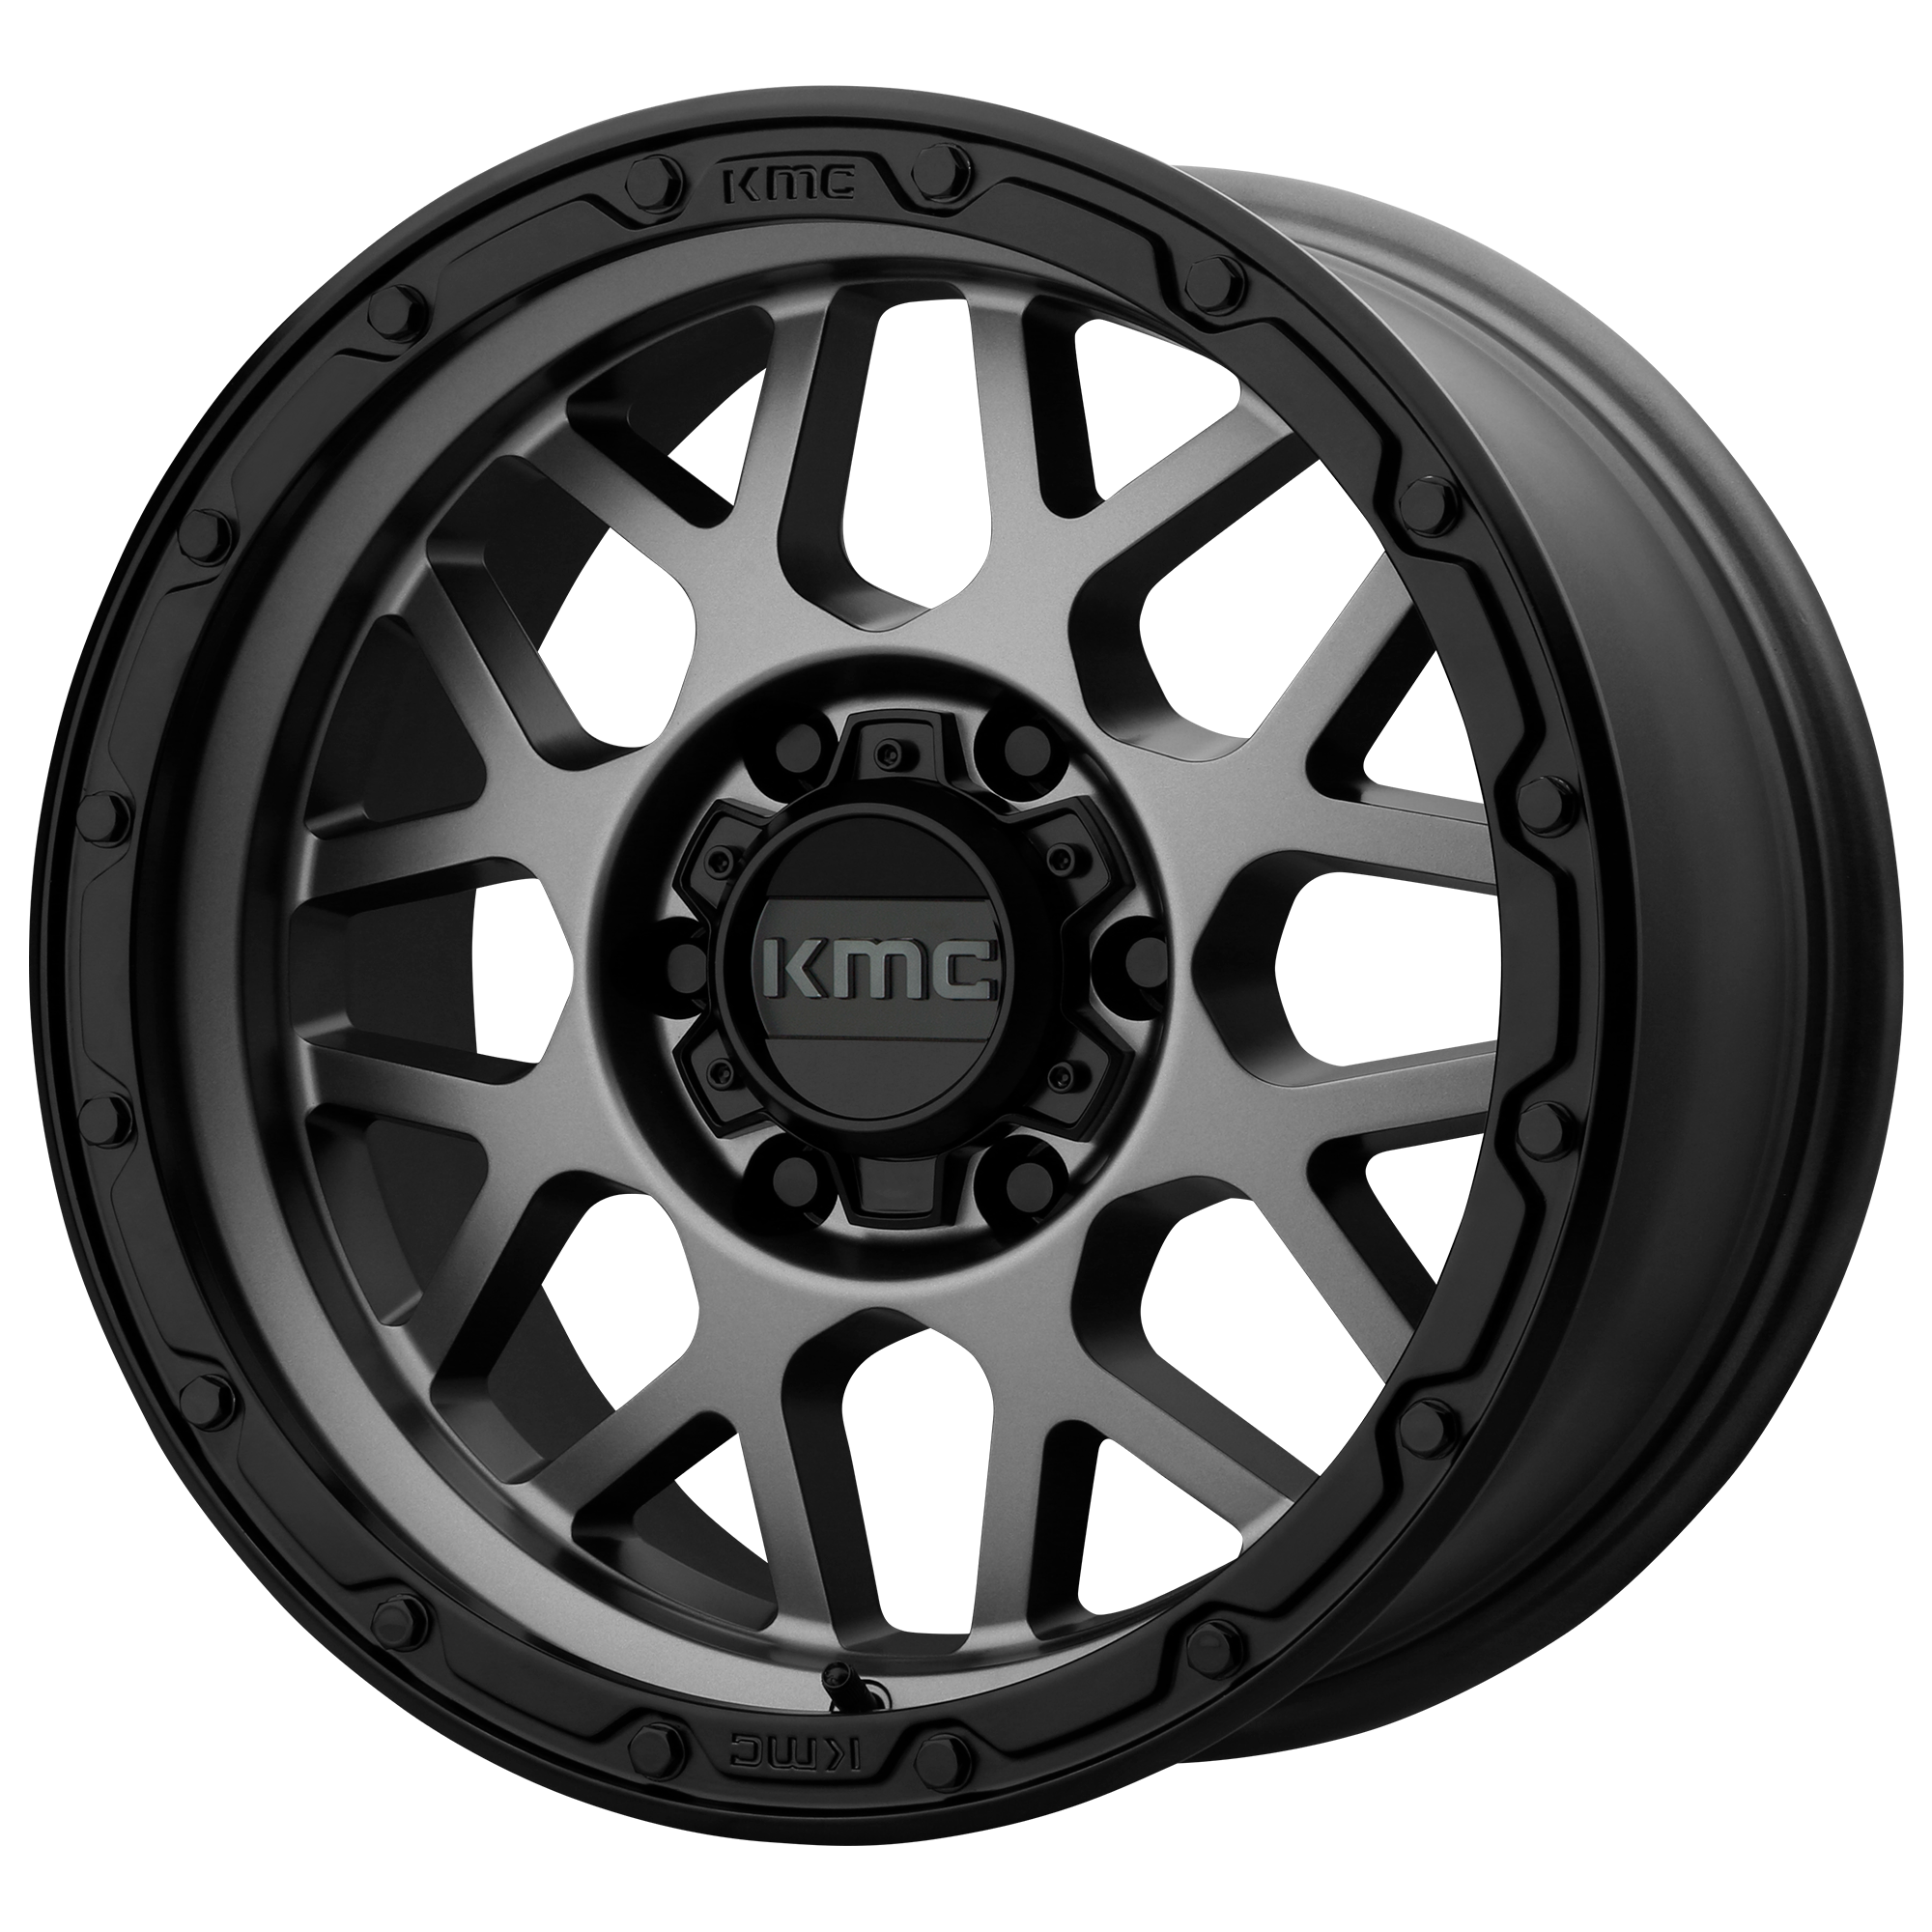 GRENADE OFF-ROAD 18x8.5 5x139.70 MATTE GRAY W/ MATTE BLACK LIP (0 mm) - Tires and Engine Performance